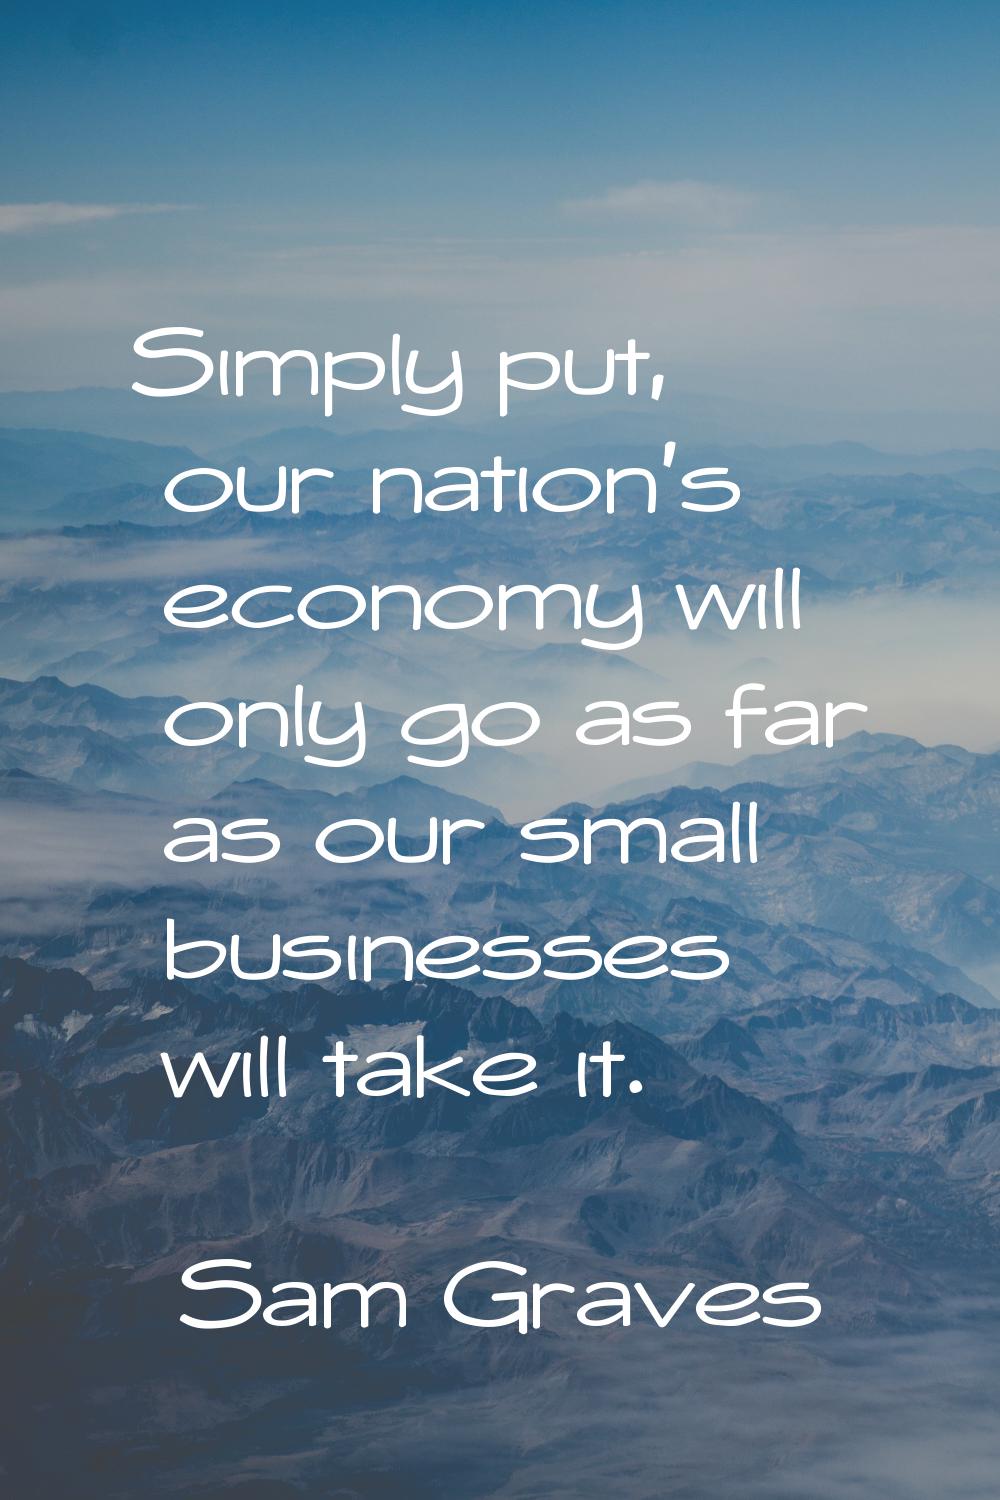 Simply put, our nation's economy will only go as far as our small businesses will take it.